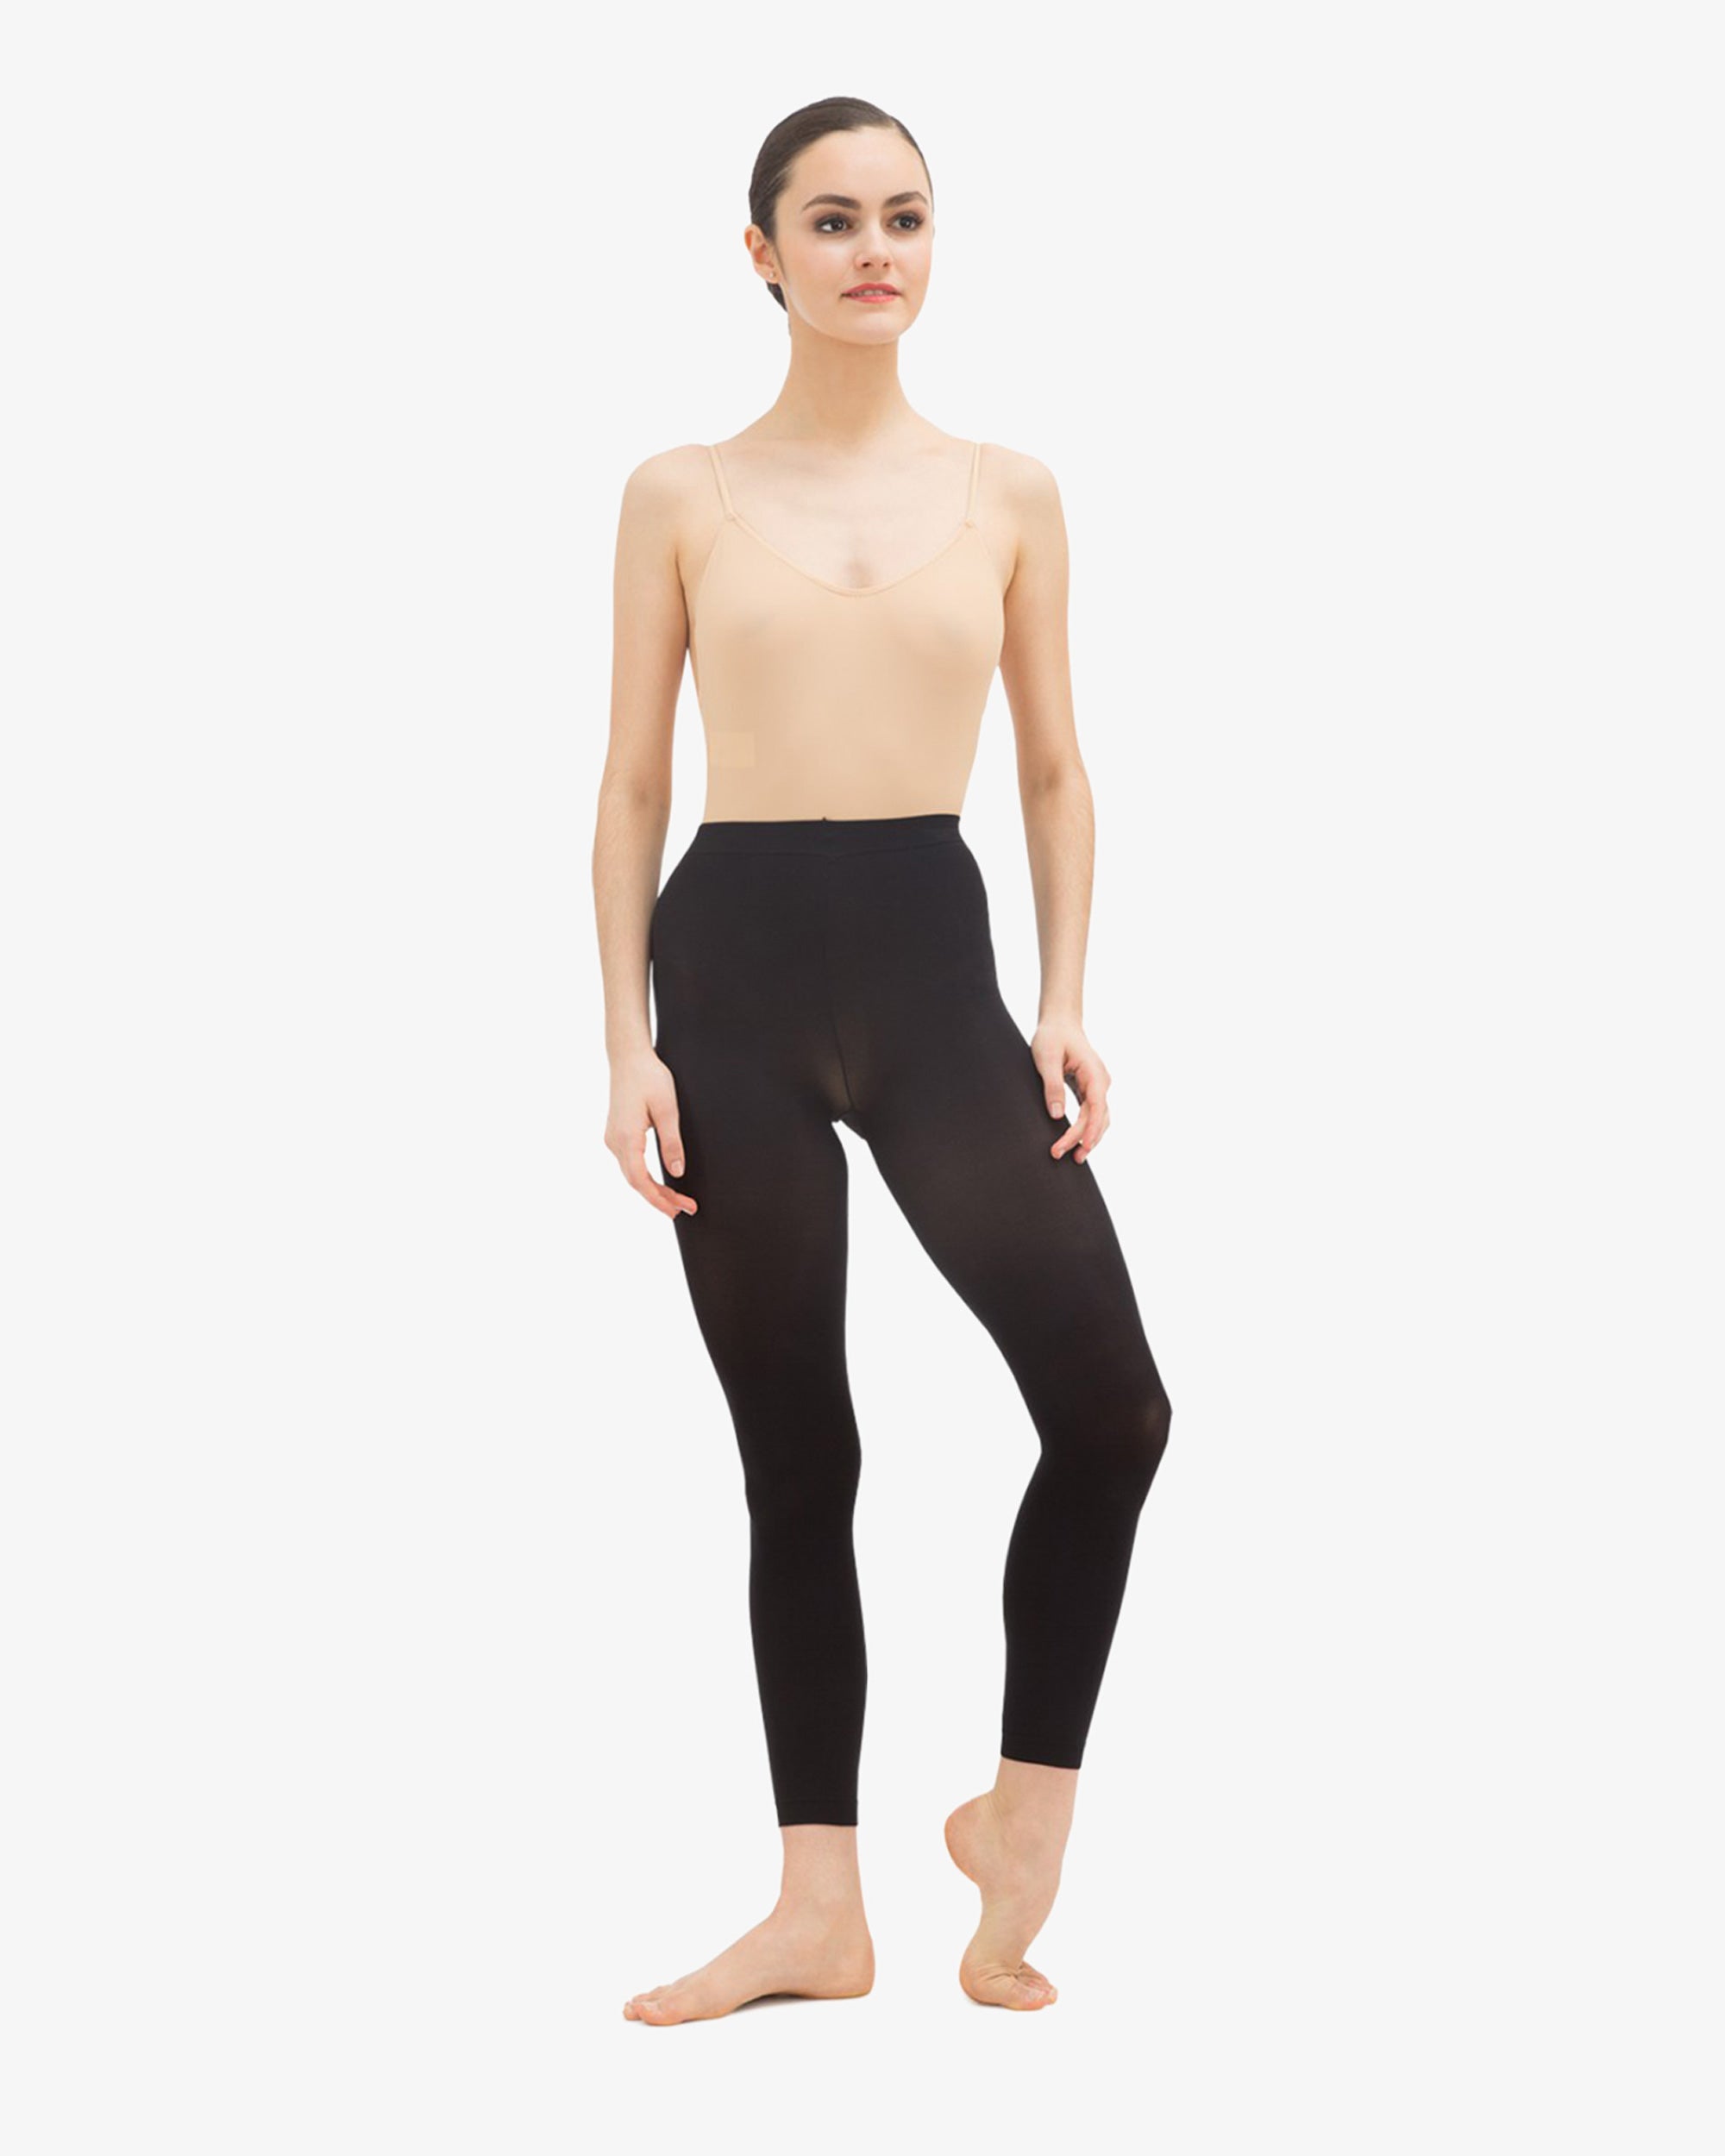 Footless Tights with Stripe for Male Dancers | Intermezzo Ballet Dance